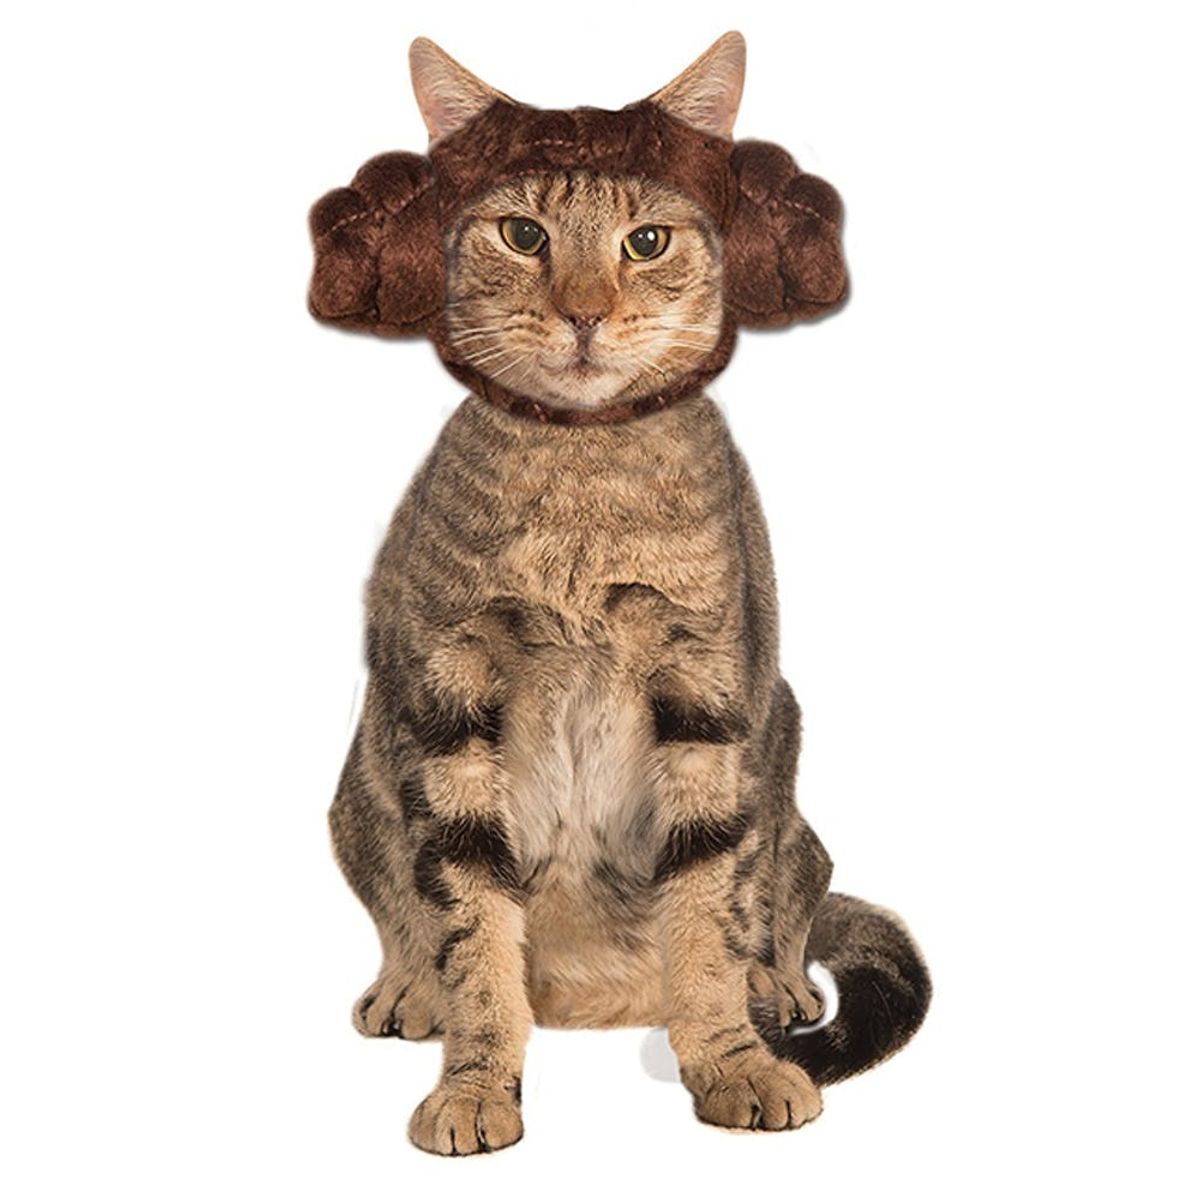 12 Cat Costumes That Will Make Your Day